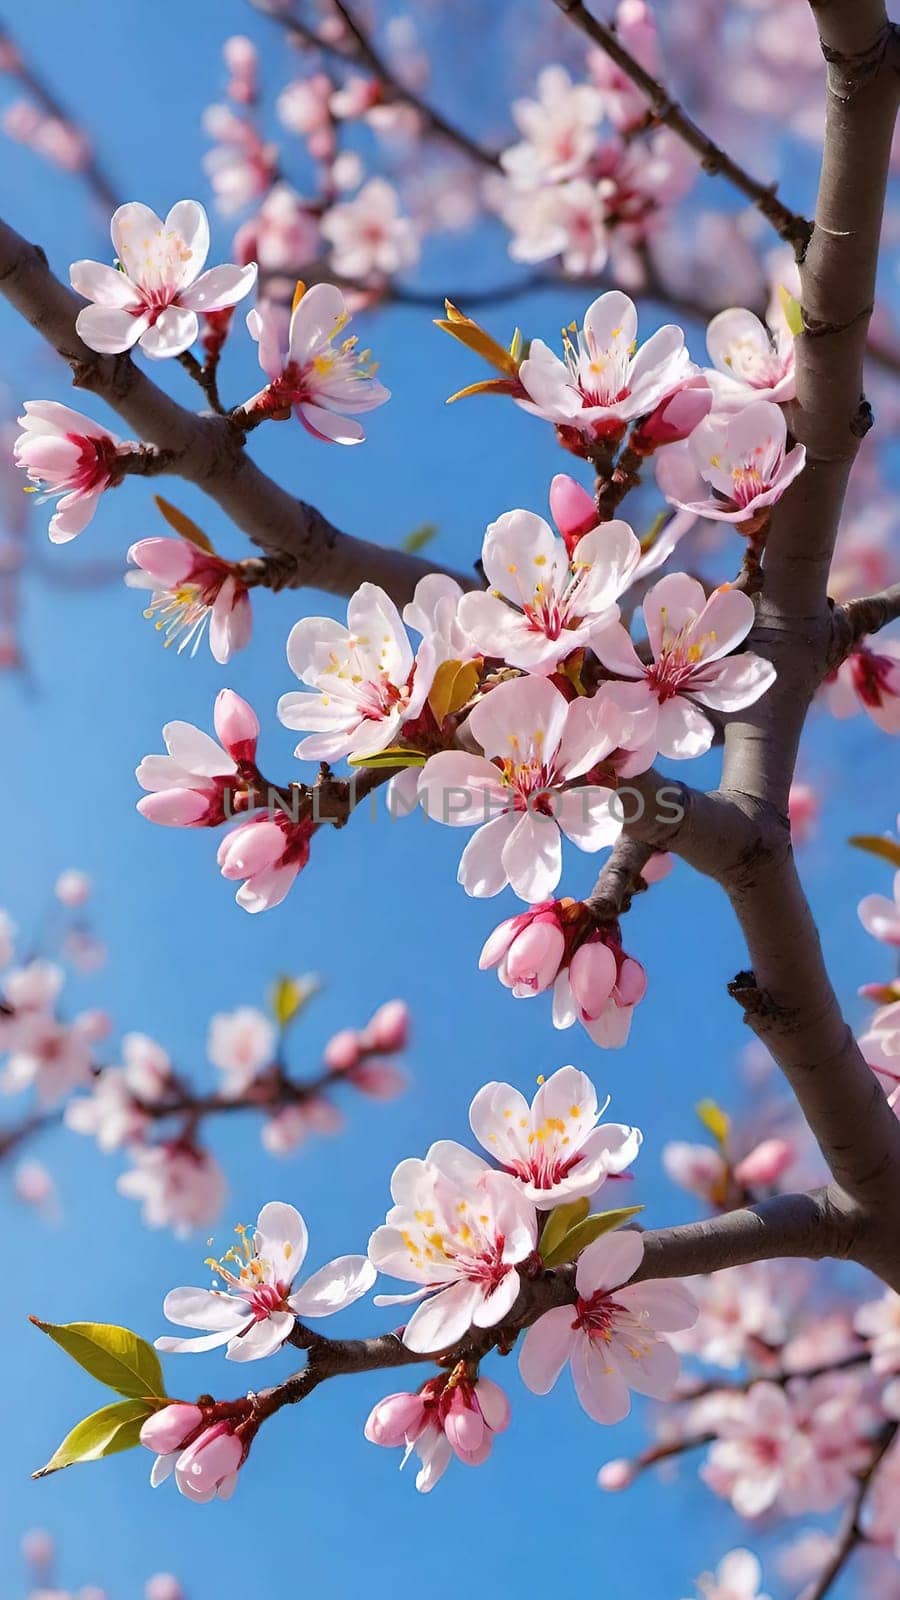 Cherry blossom in spring, pink flowers on blue sky background.cherry blossom on blue sky background, closeup of flowers. Sakura.Branch of blossoming tree with pink flowers on blue sky background.